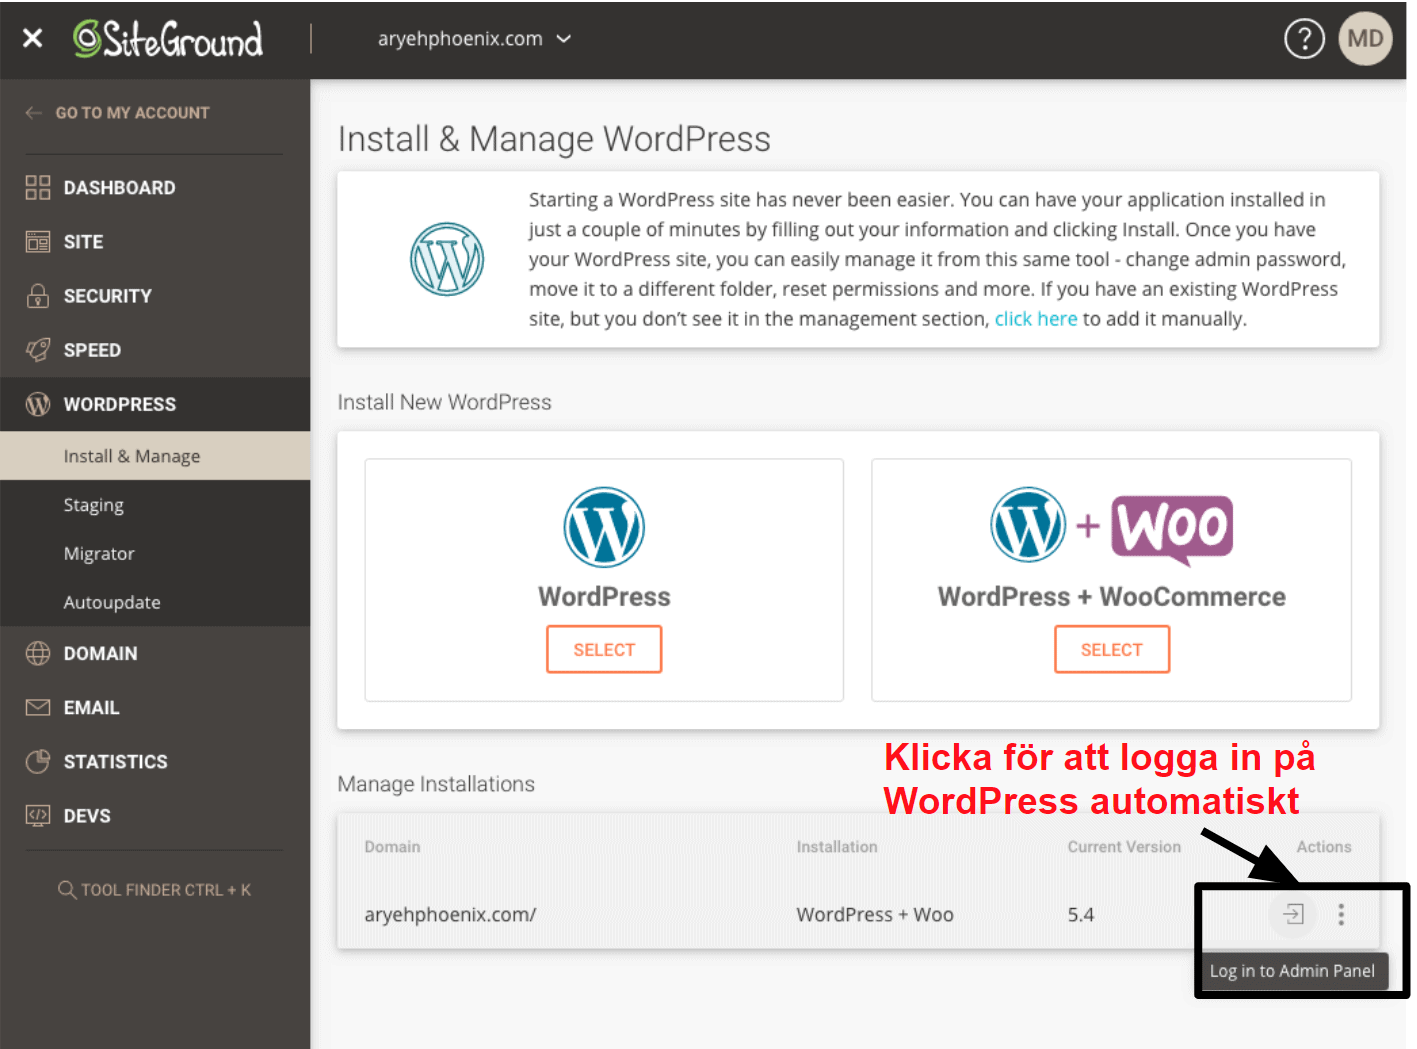 SiteGround offers a one click login option for your WordPress dashboard SV15